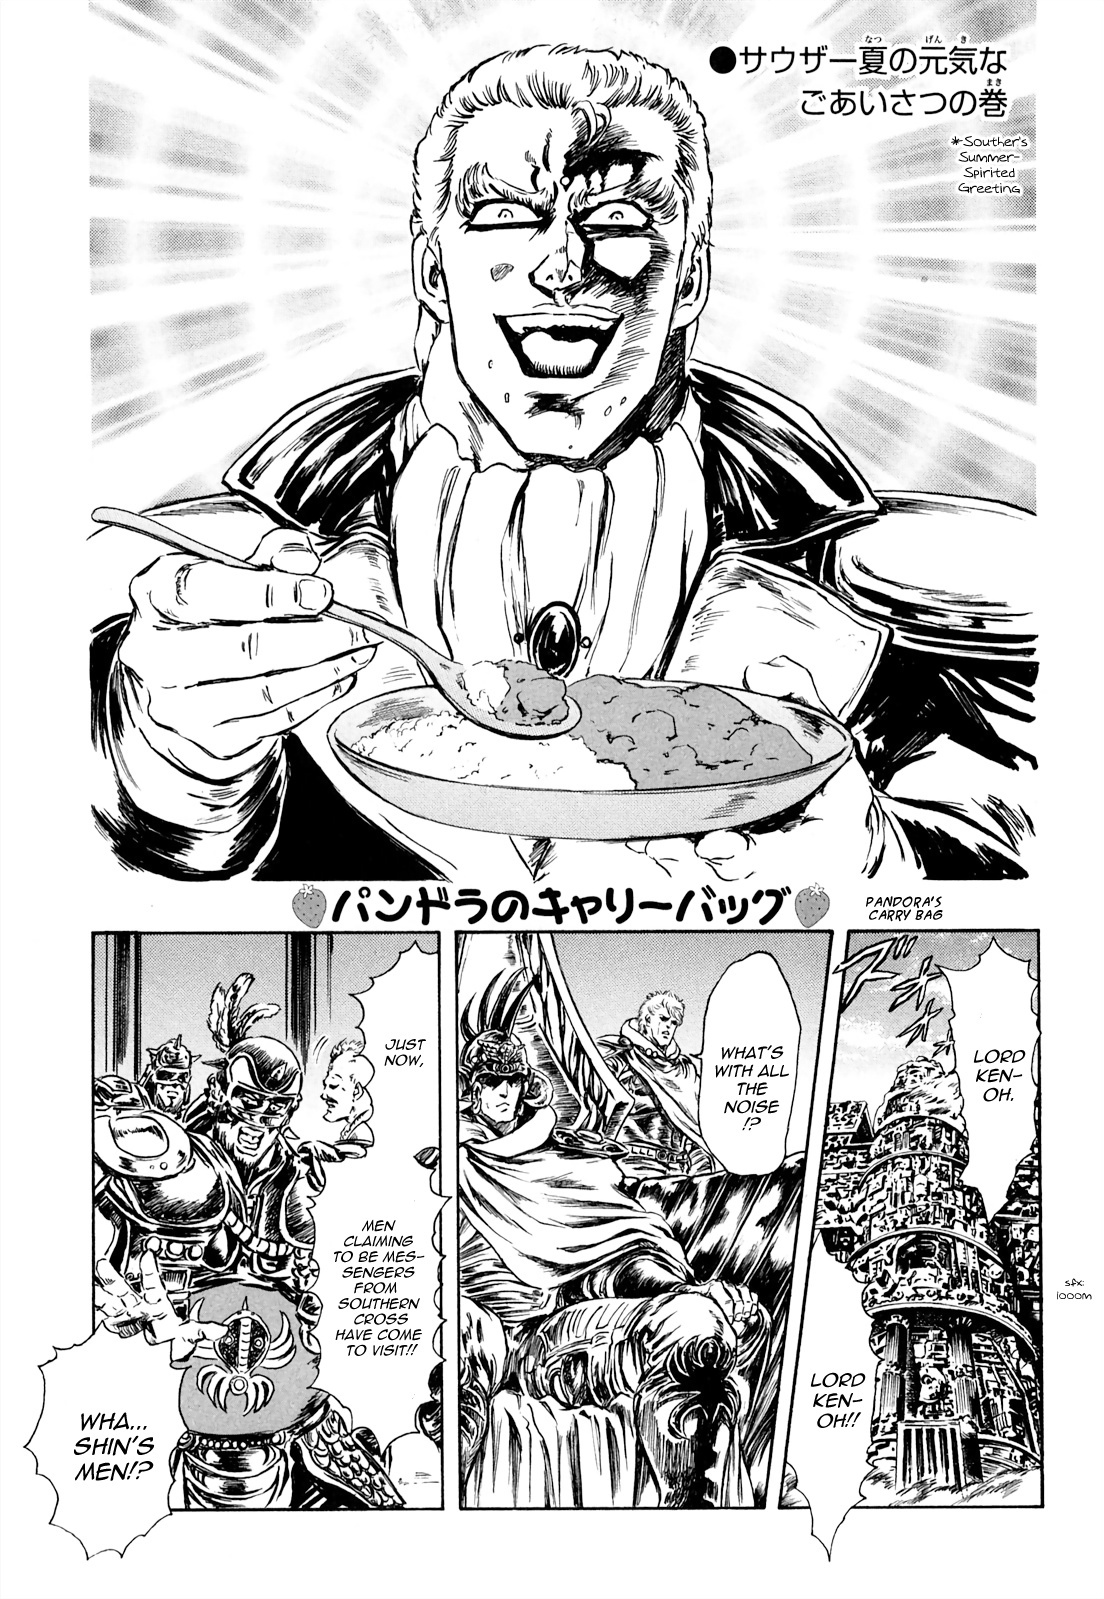 Fist Of The North Star - Strawberry Flavor Vol.3 Chapter 30: Souther's Summer-Spirited Greeting - Picture 1